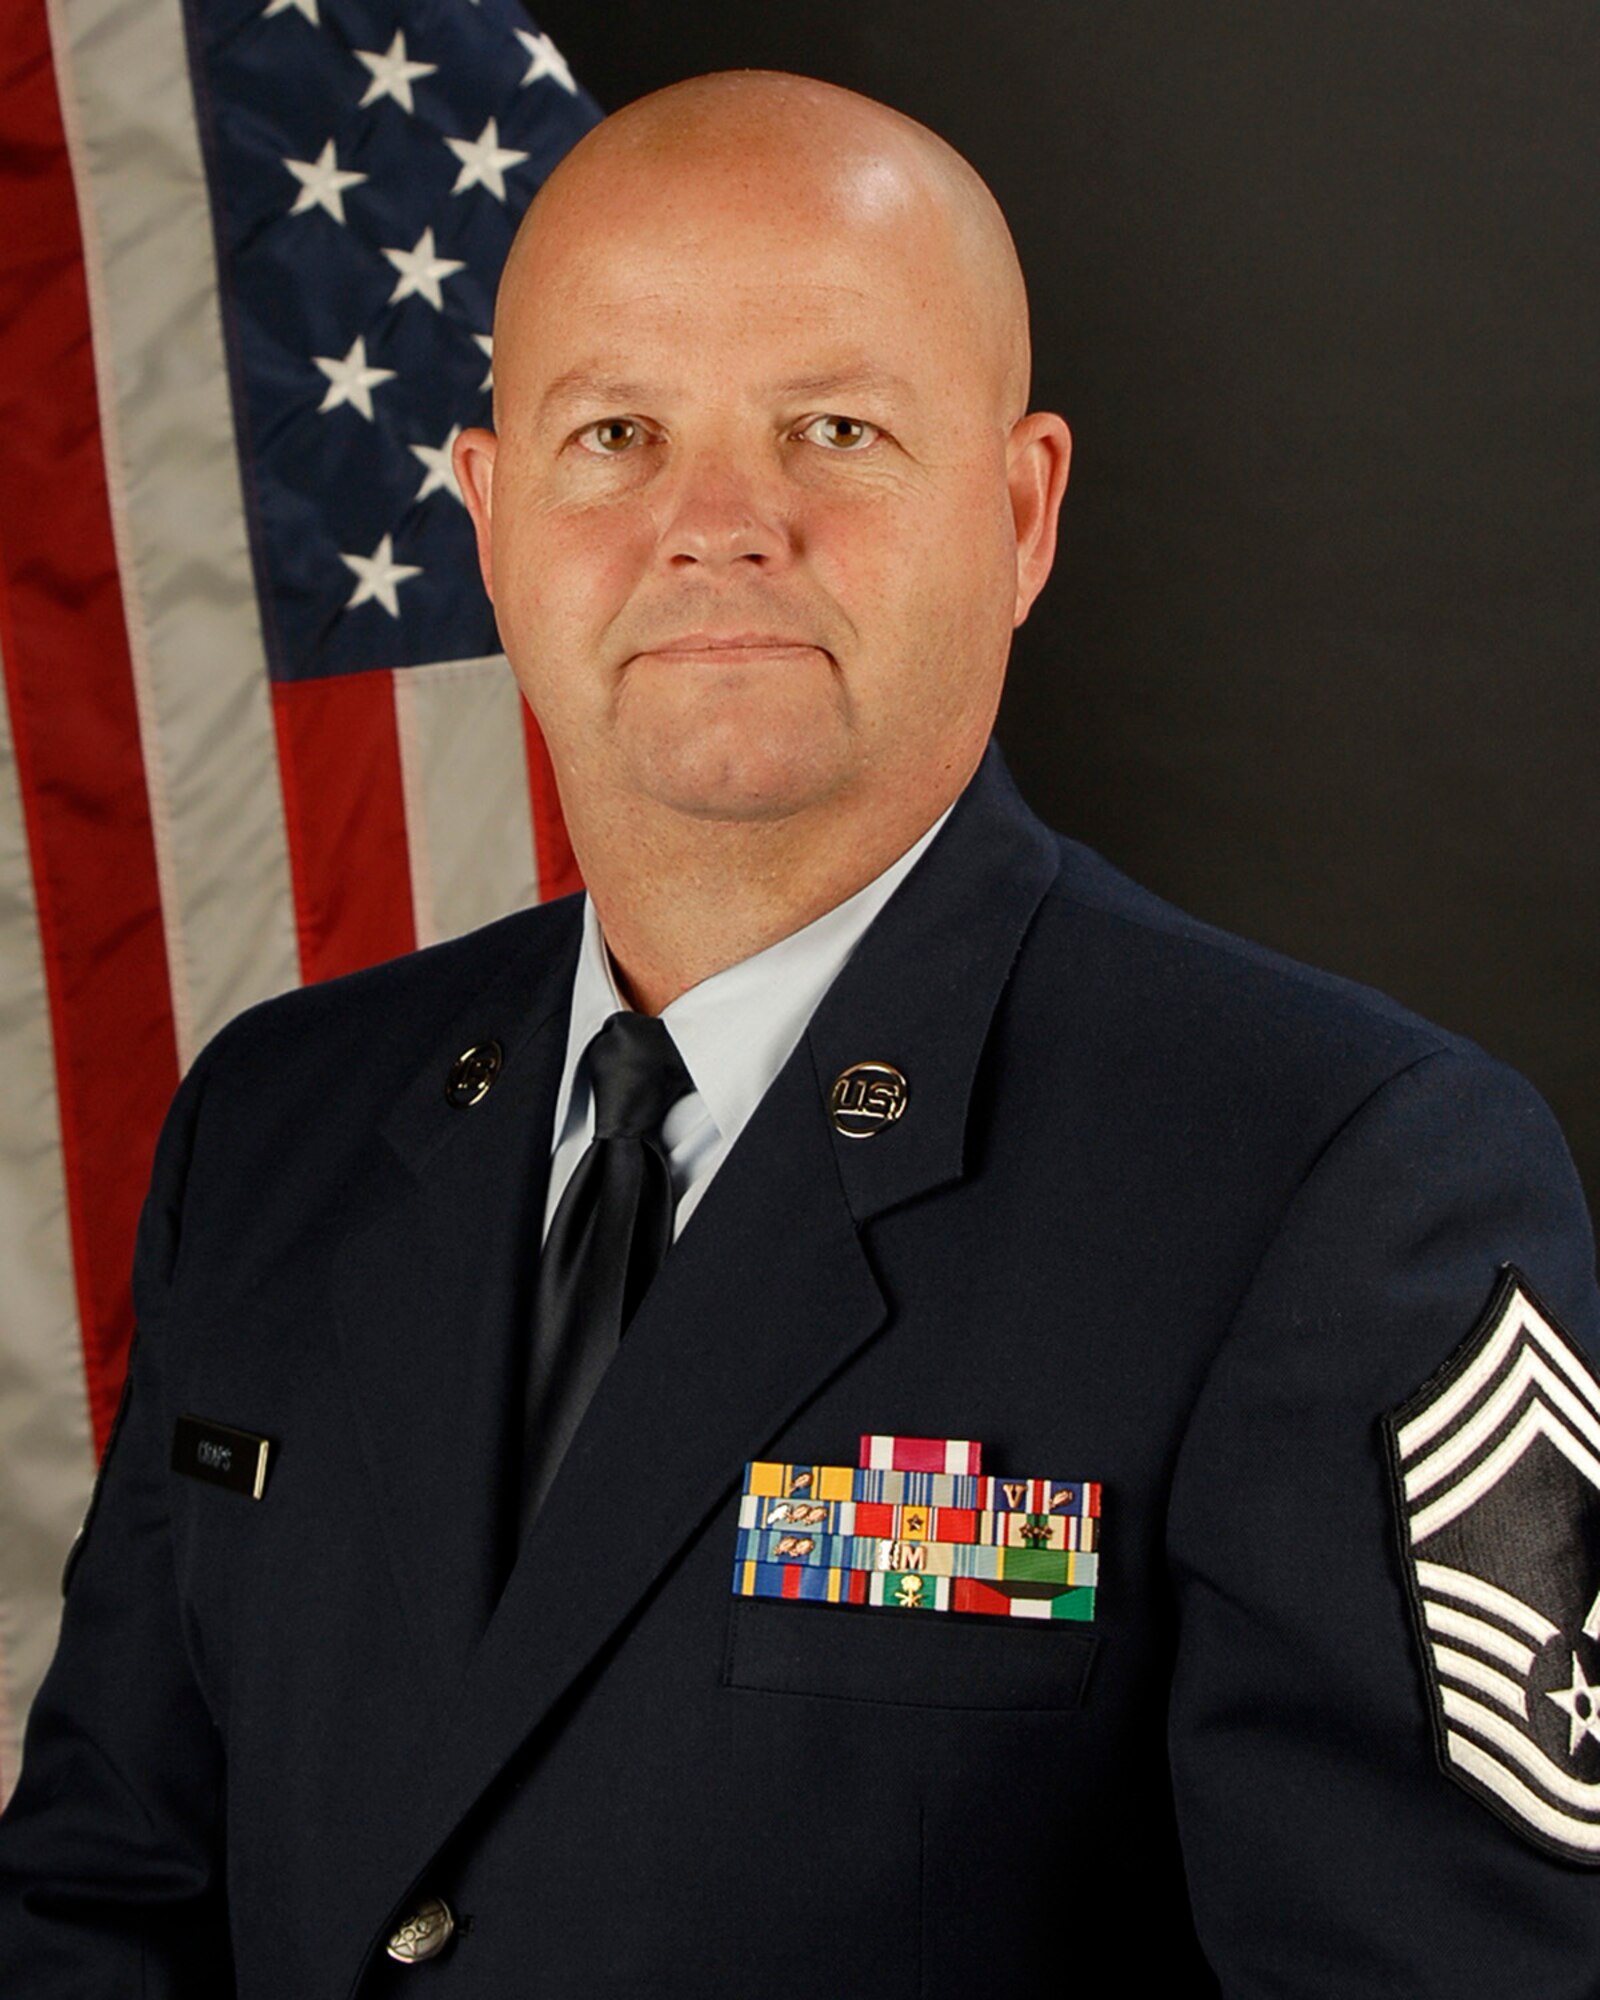 U.S. Air Force Chief Master Sgt. Mark Craps, from the 245th Air Traffic Control Squadron.  (U.S. Air National Guard Photo by Senior Master Sgt. Edward E. Snyder/Released)